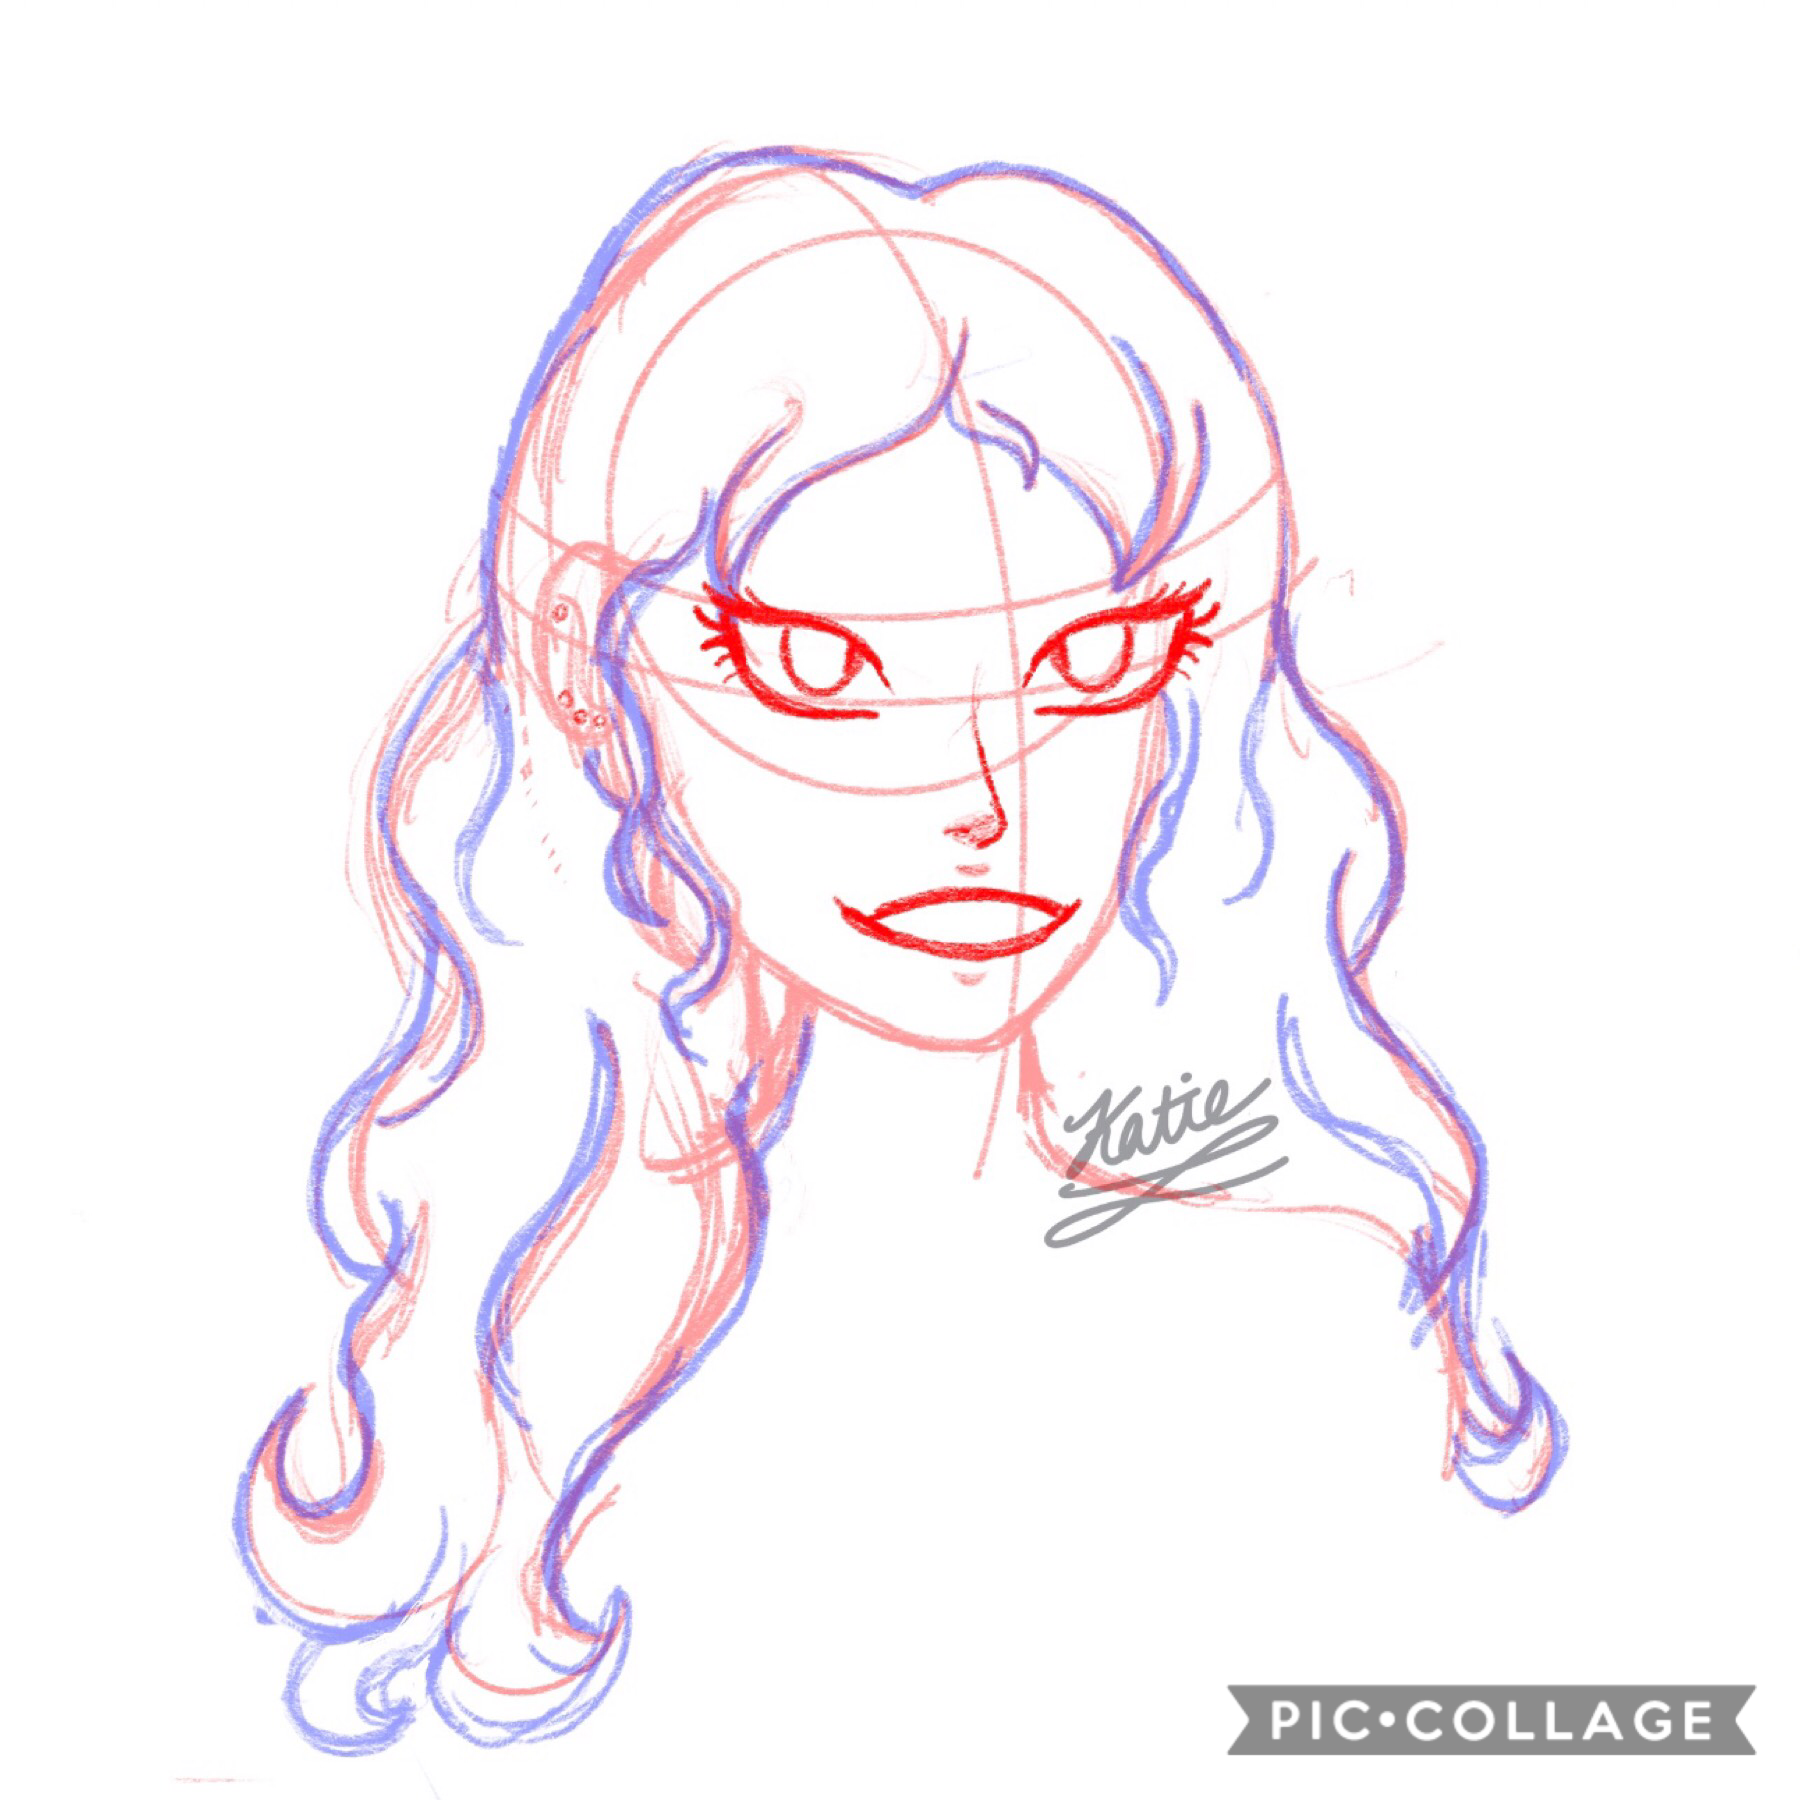 quick 5-10 minute sketch- 
yay you actually tapped! here’s a really quick sketch that’s about to be ruined by lineart lol
not my best, but I still like it? I think? ignore the bad proportion lines tho lol. prob going to take this down soon.